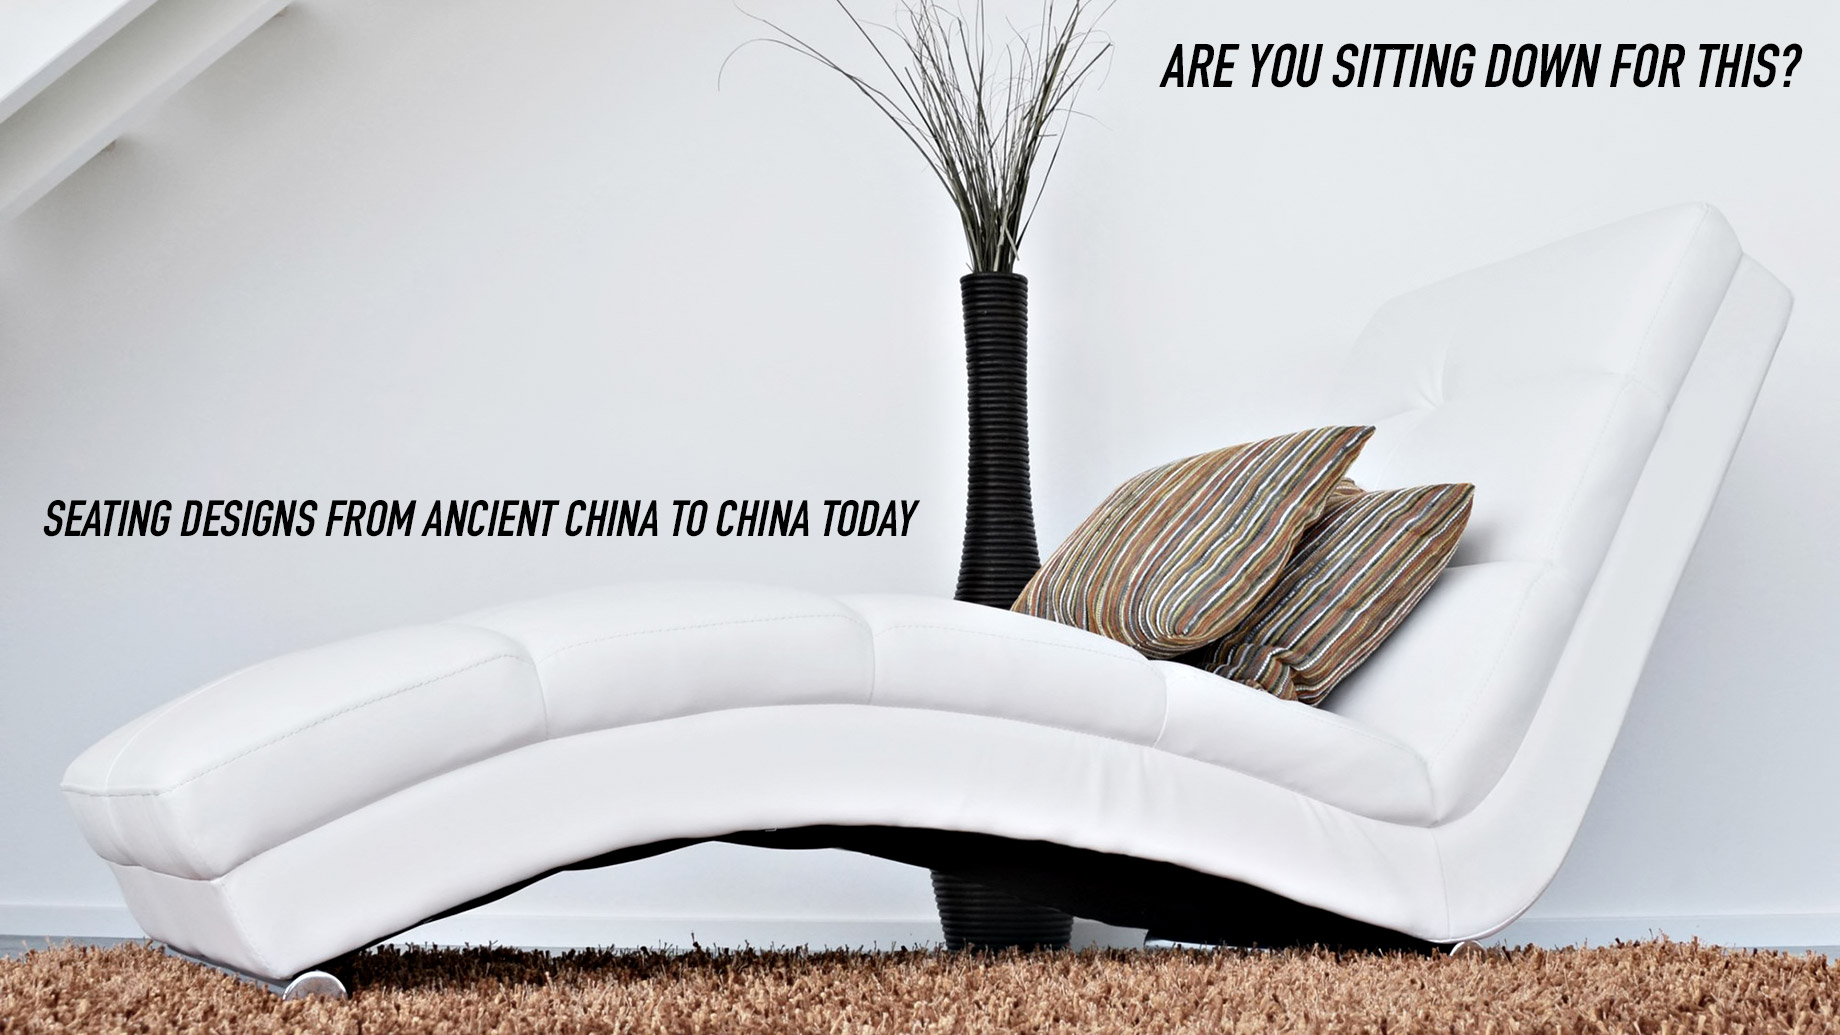 Are You Sitting Down for This? Seating Designs from Ancient China to China Today